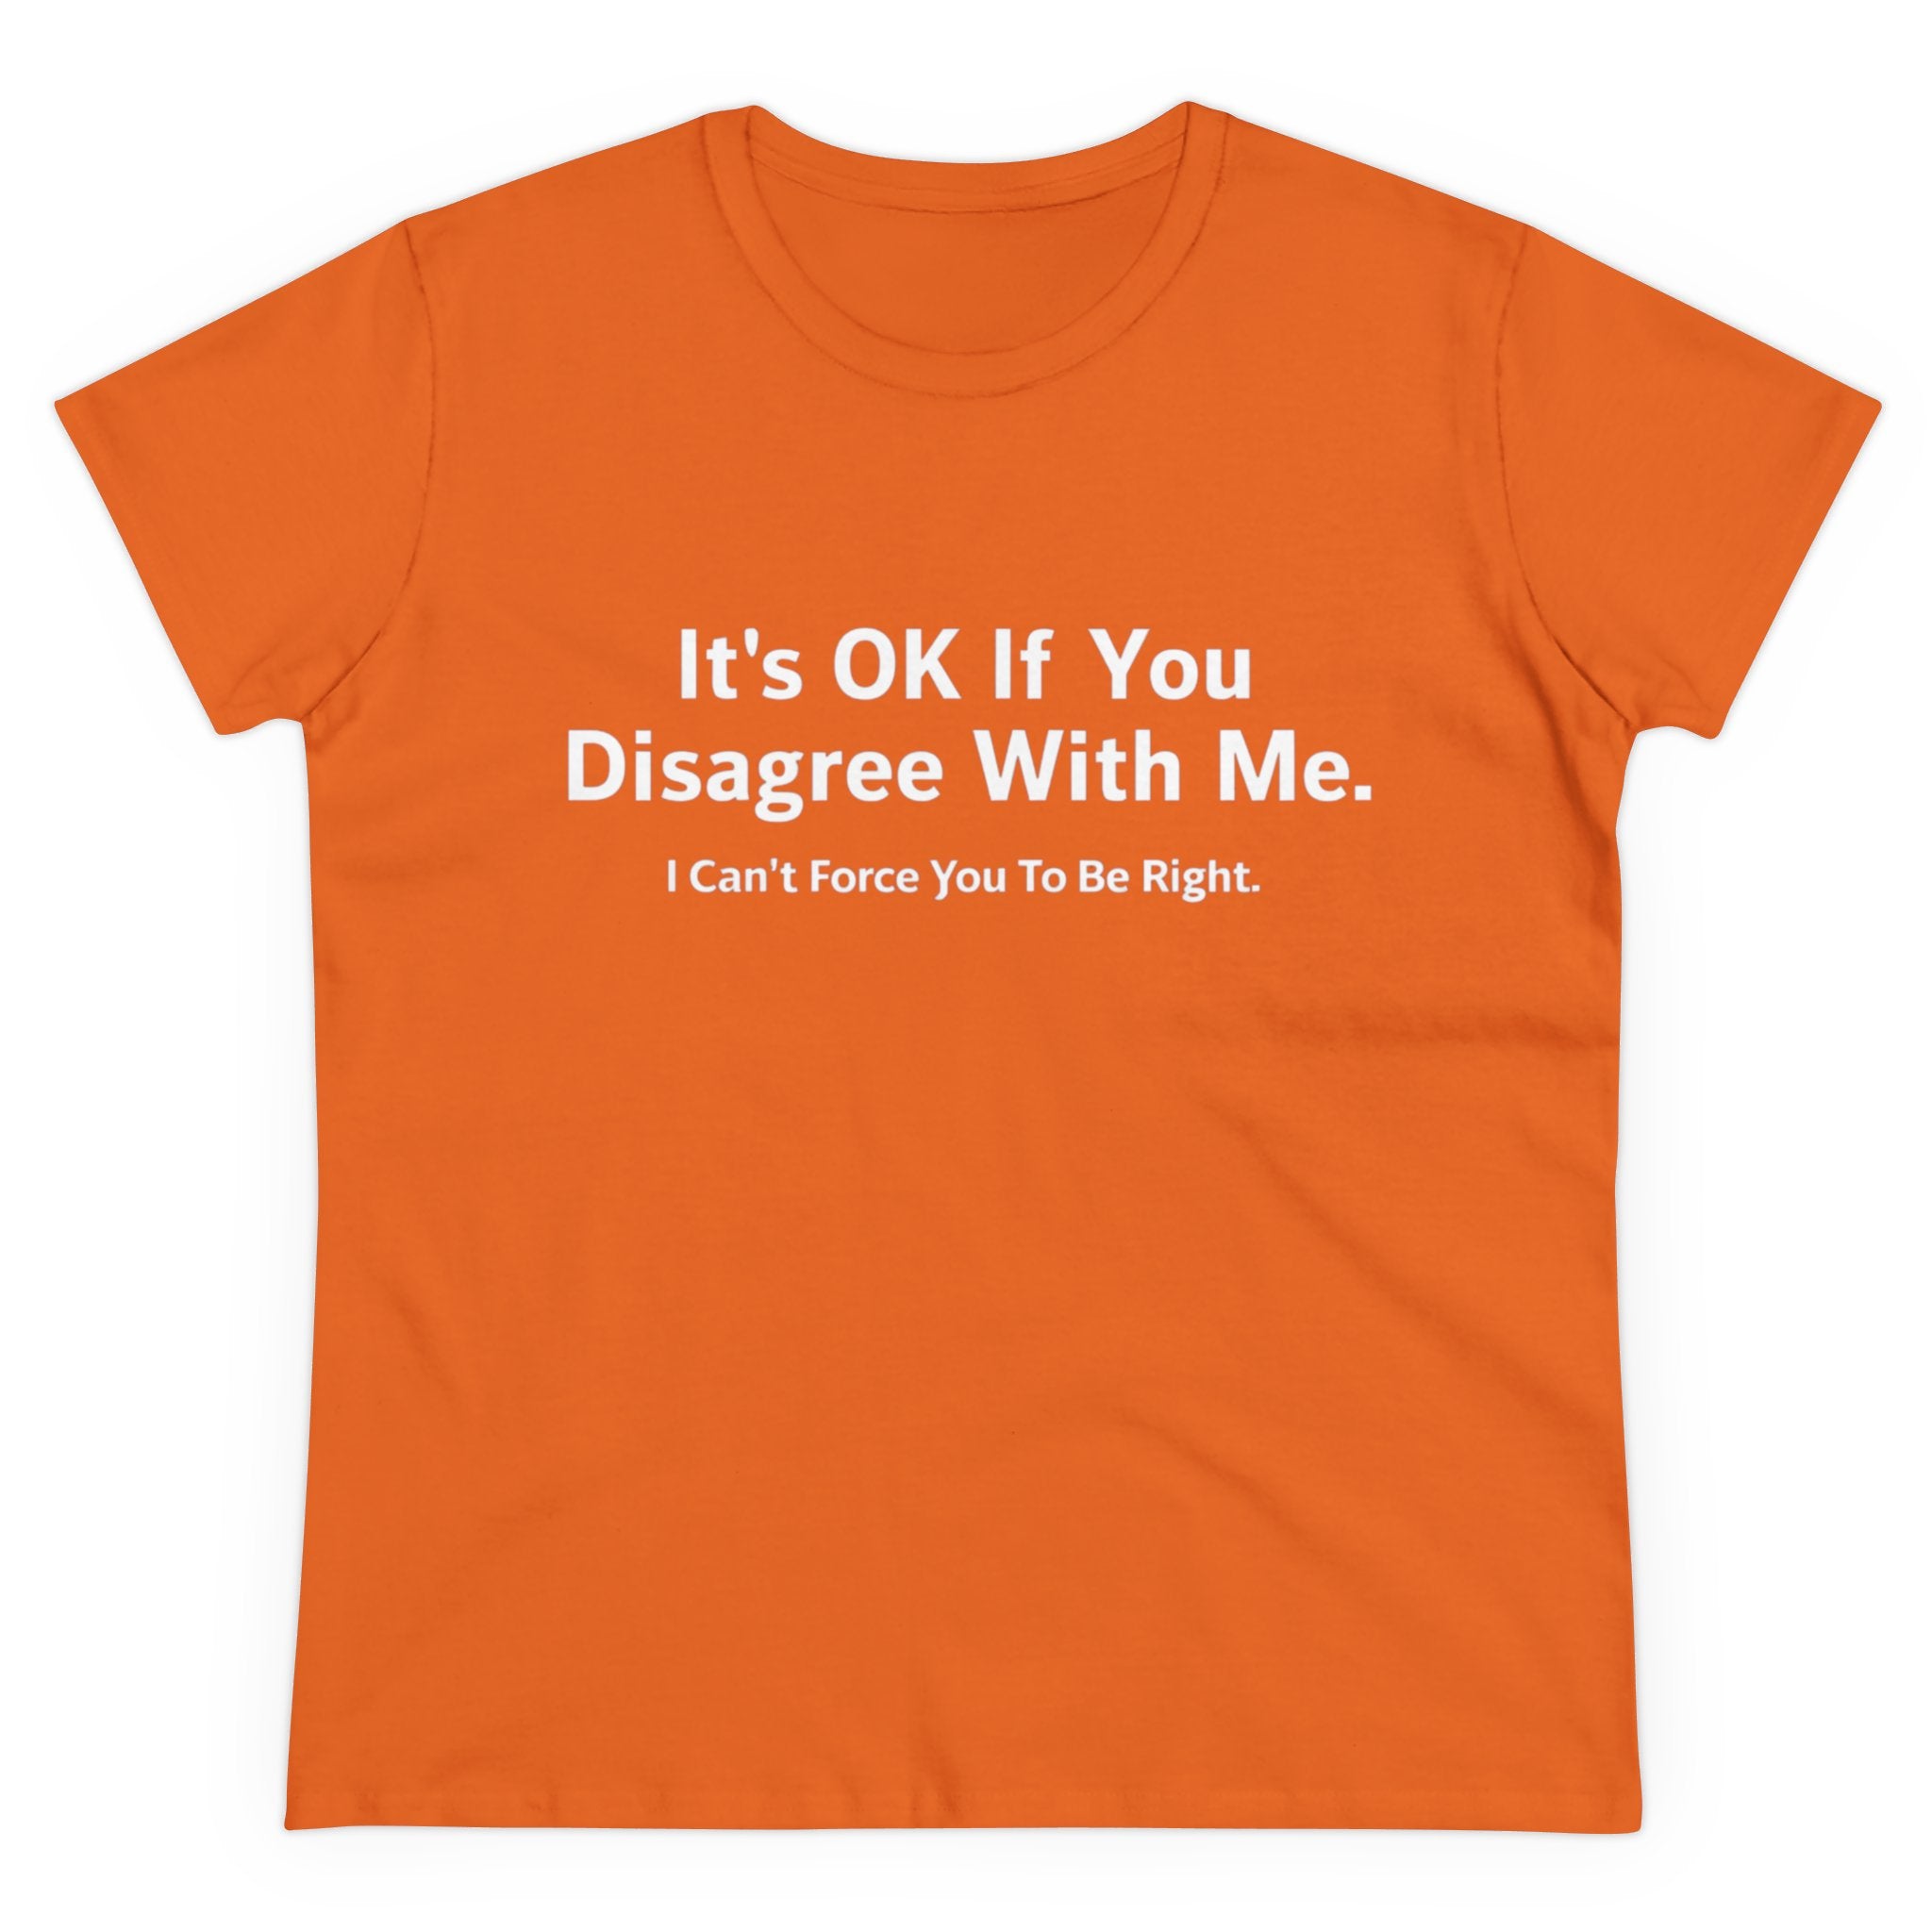 It's Ok If You Disagree With Me - Women's Tee with white text reading, "It's OK If You Disagree With Me. I Can't Force You To Be Right." This shirt offers both comfort & style with an empowering print.